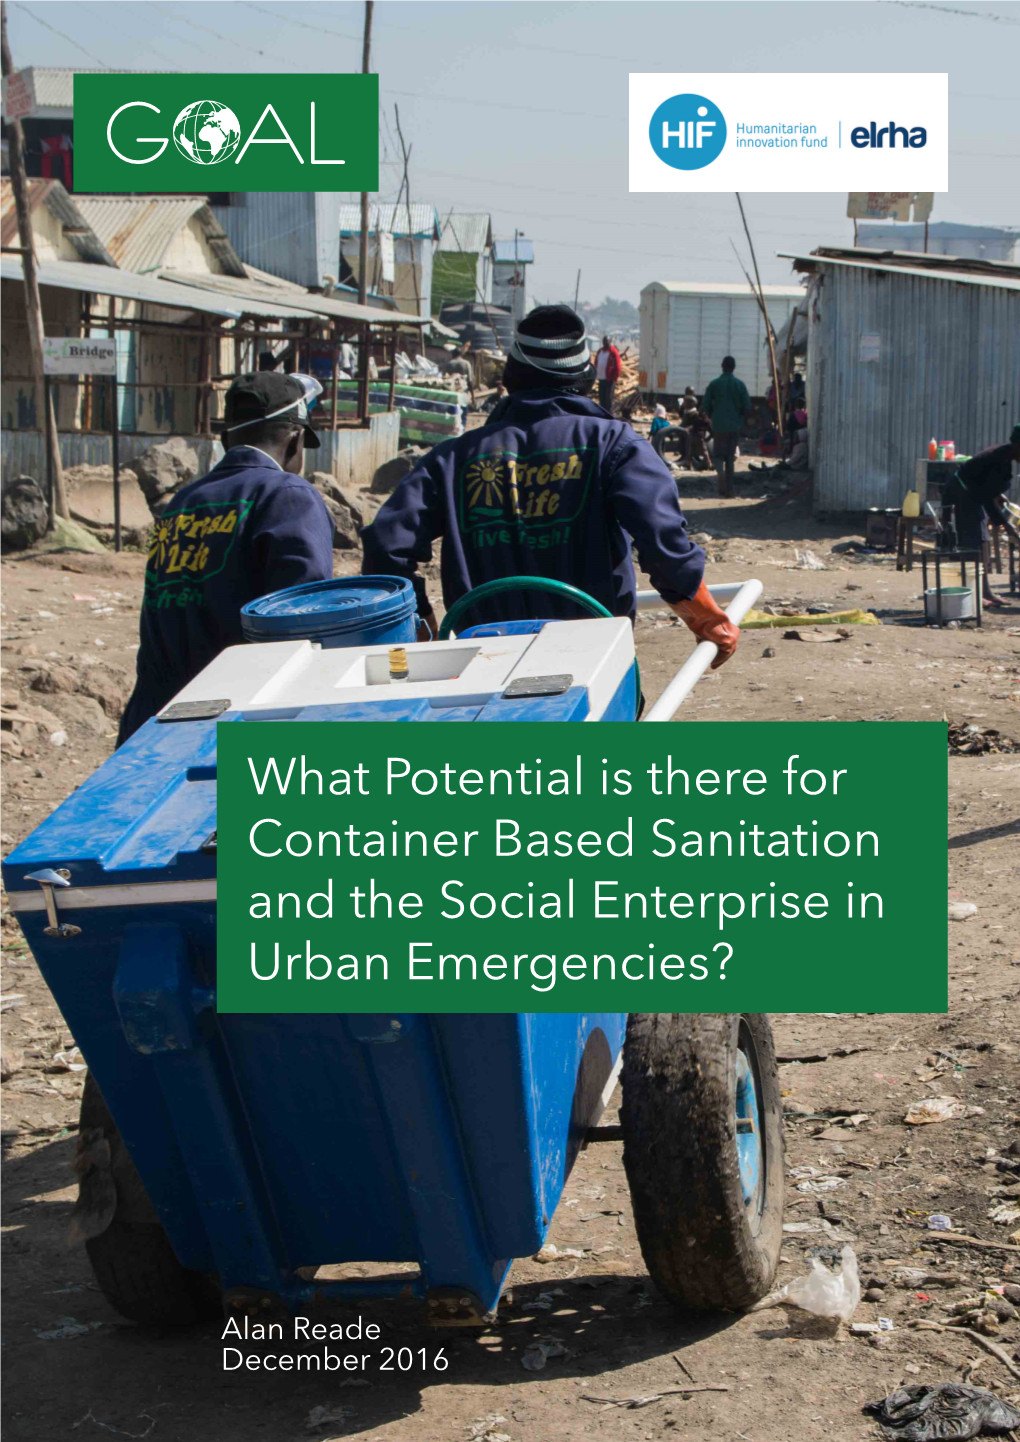 What Potential Is There for Container Based Sanitation and the Social Enterprise in Urban Emergencies?